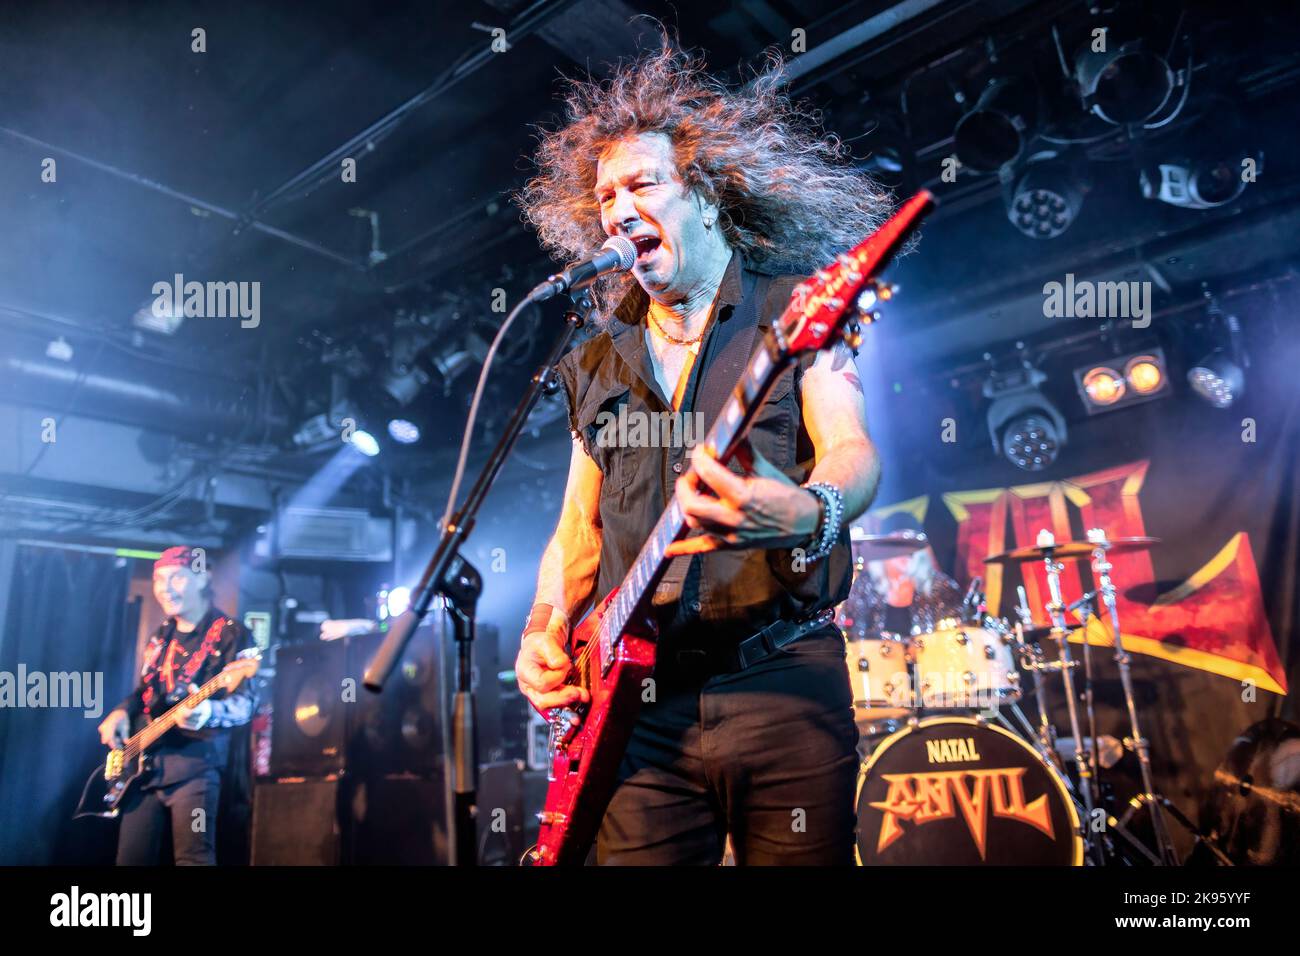 Oslo, Norway. 24th, October 2022. The Canadian heavy metal band Anvil performs a live concert at John Dee in Oslo. Here vocalist and guitarist Steve Kudlow a.k.a. Lips is seen live on stage. (Photo credit: Gonzales Photo - Terje Dokken). Stock Photo